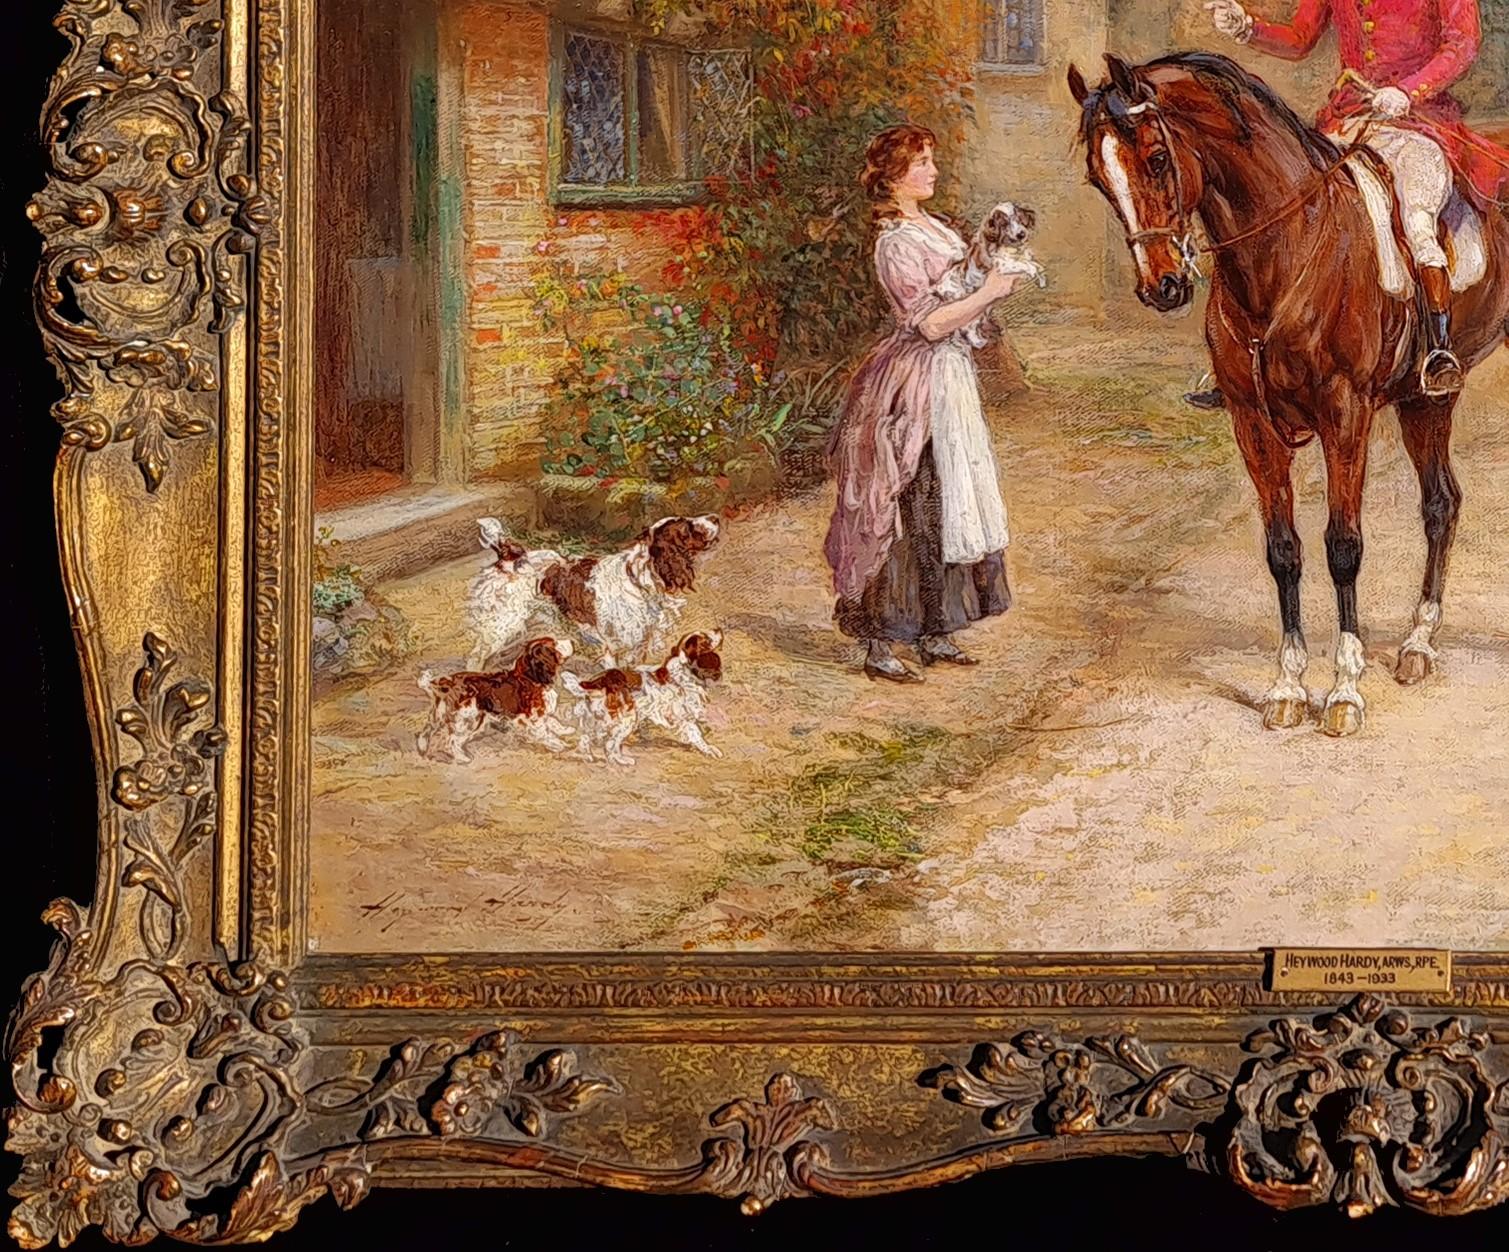 The New Litter - Brown Landscape Painting by Heywood Hardy